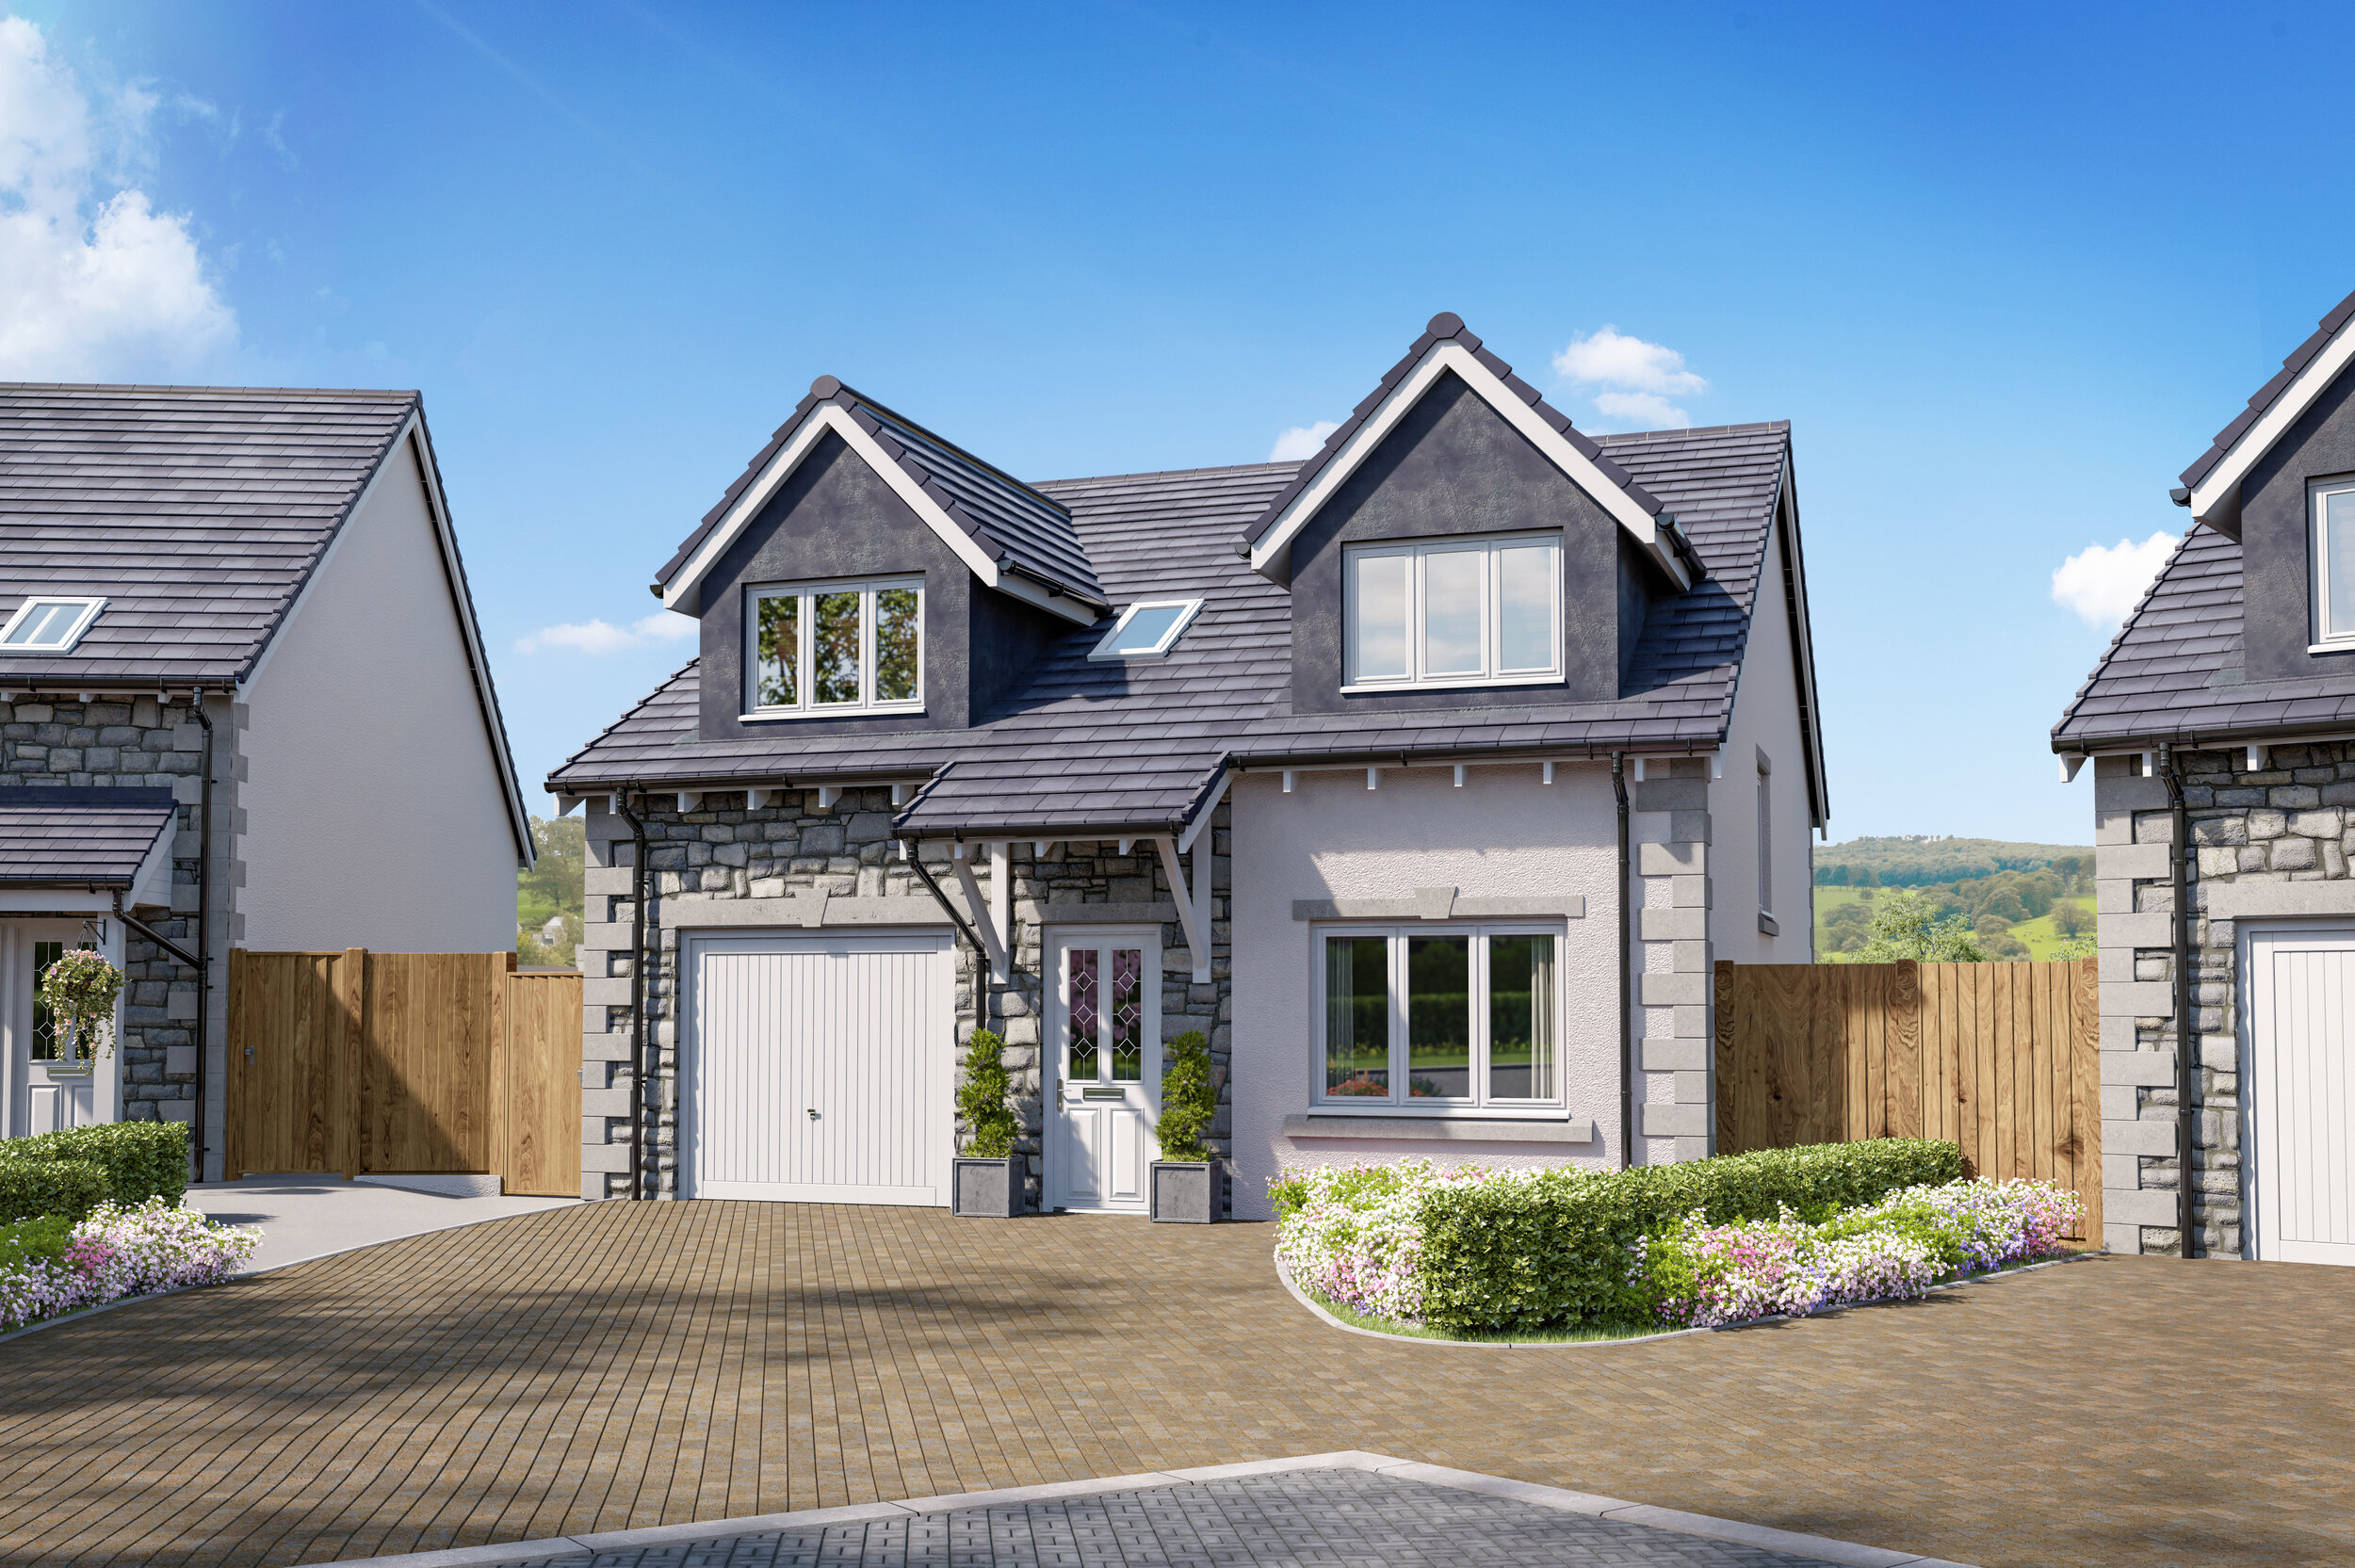 The Windsor 4 bedroom detached - click image for virtual tour